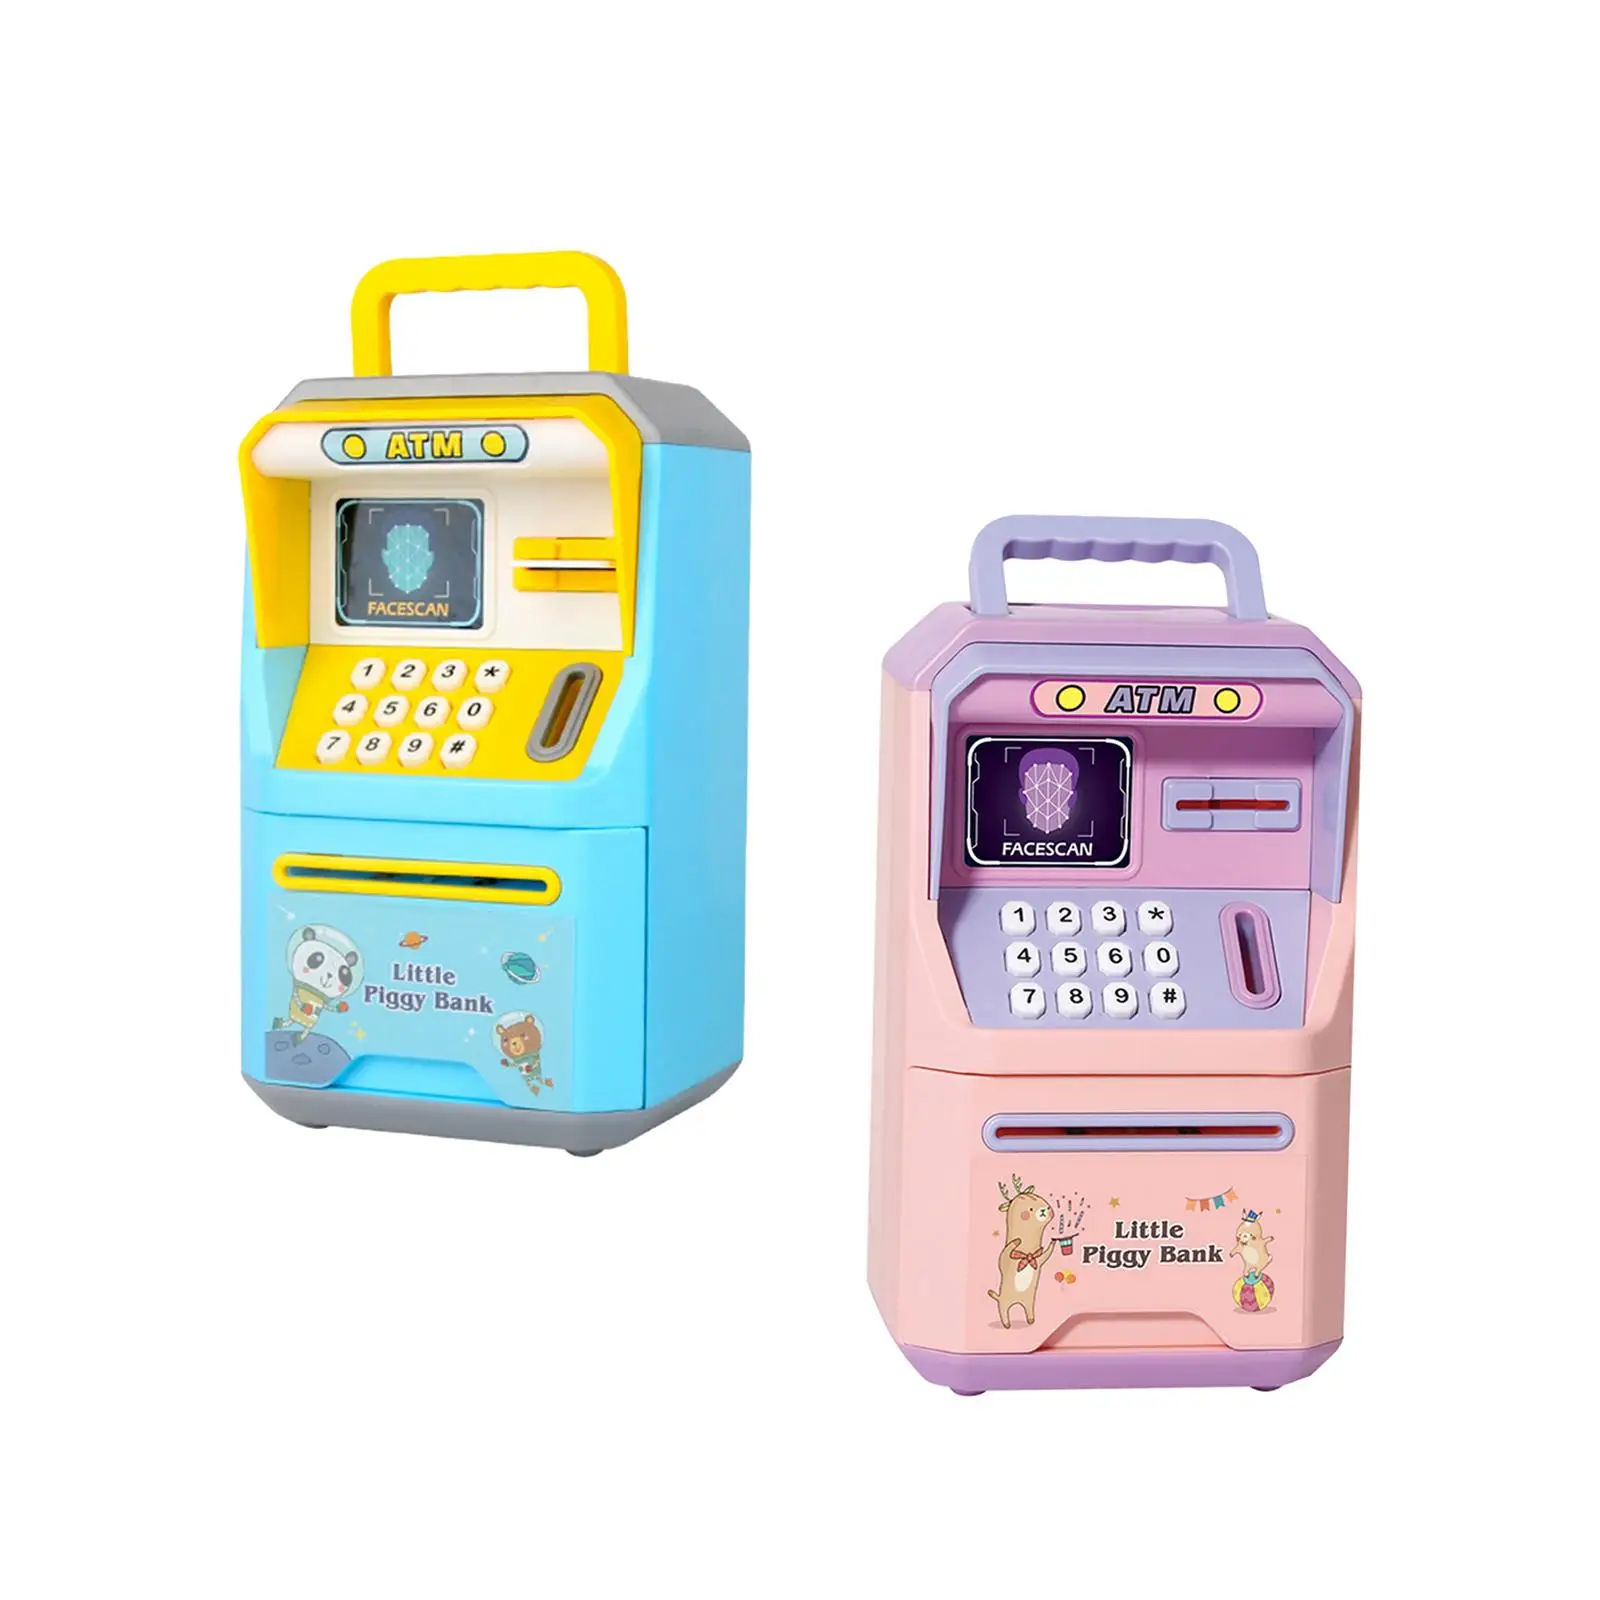 

ATM Savings Bank Fingerprint and Password Cash Security Box Auto Scroll Cash Machine for Children Age 3-8 Years Girls Boys Gifts